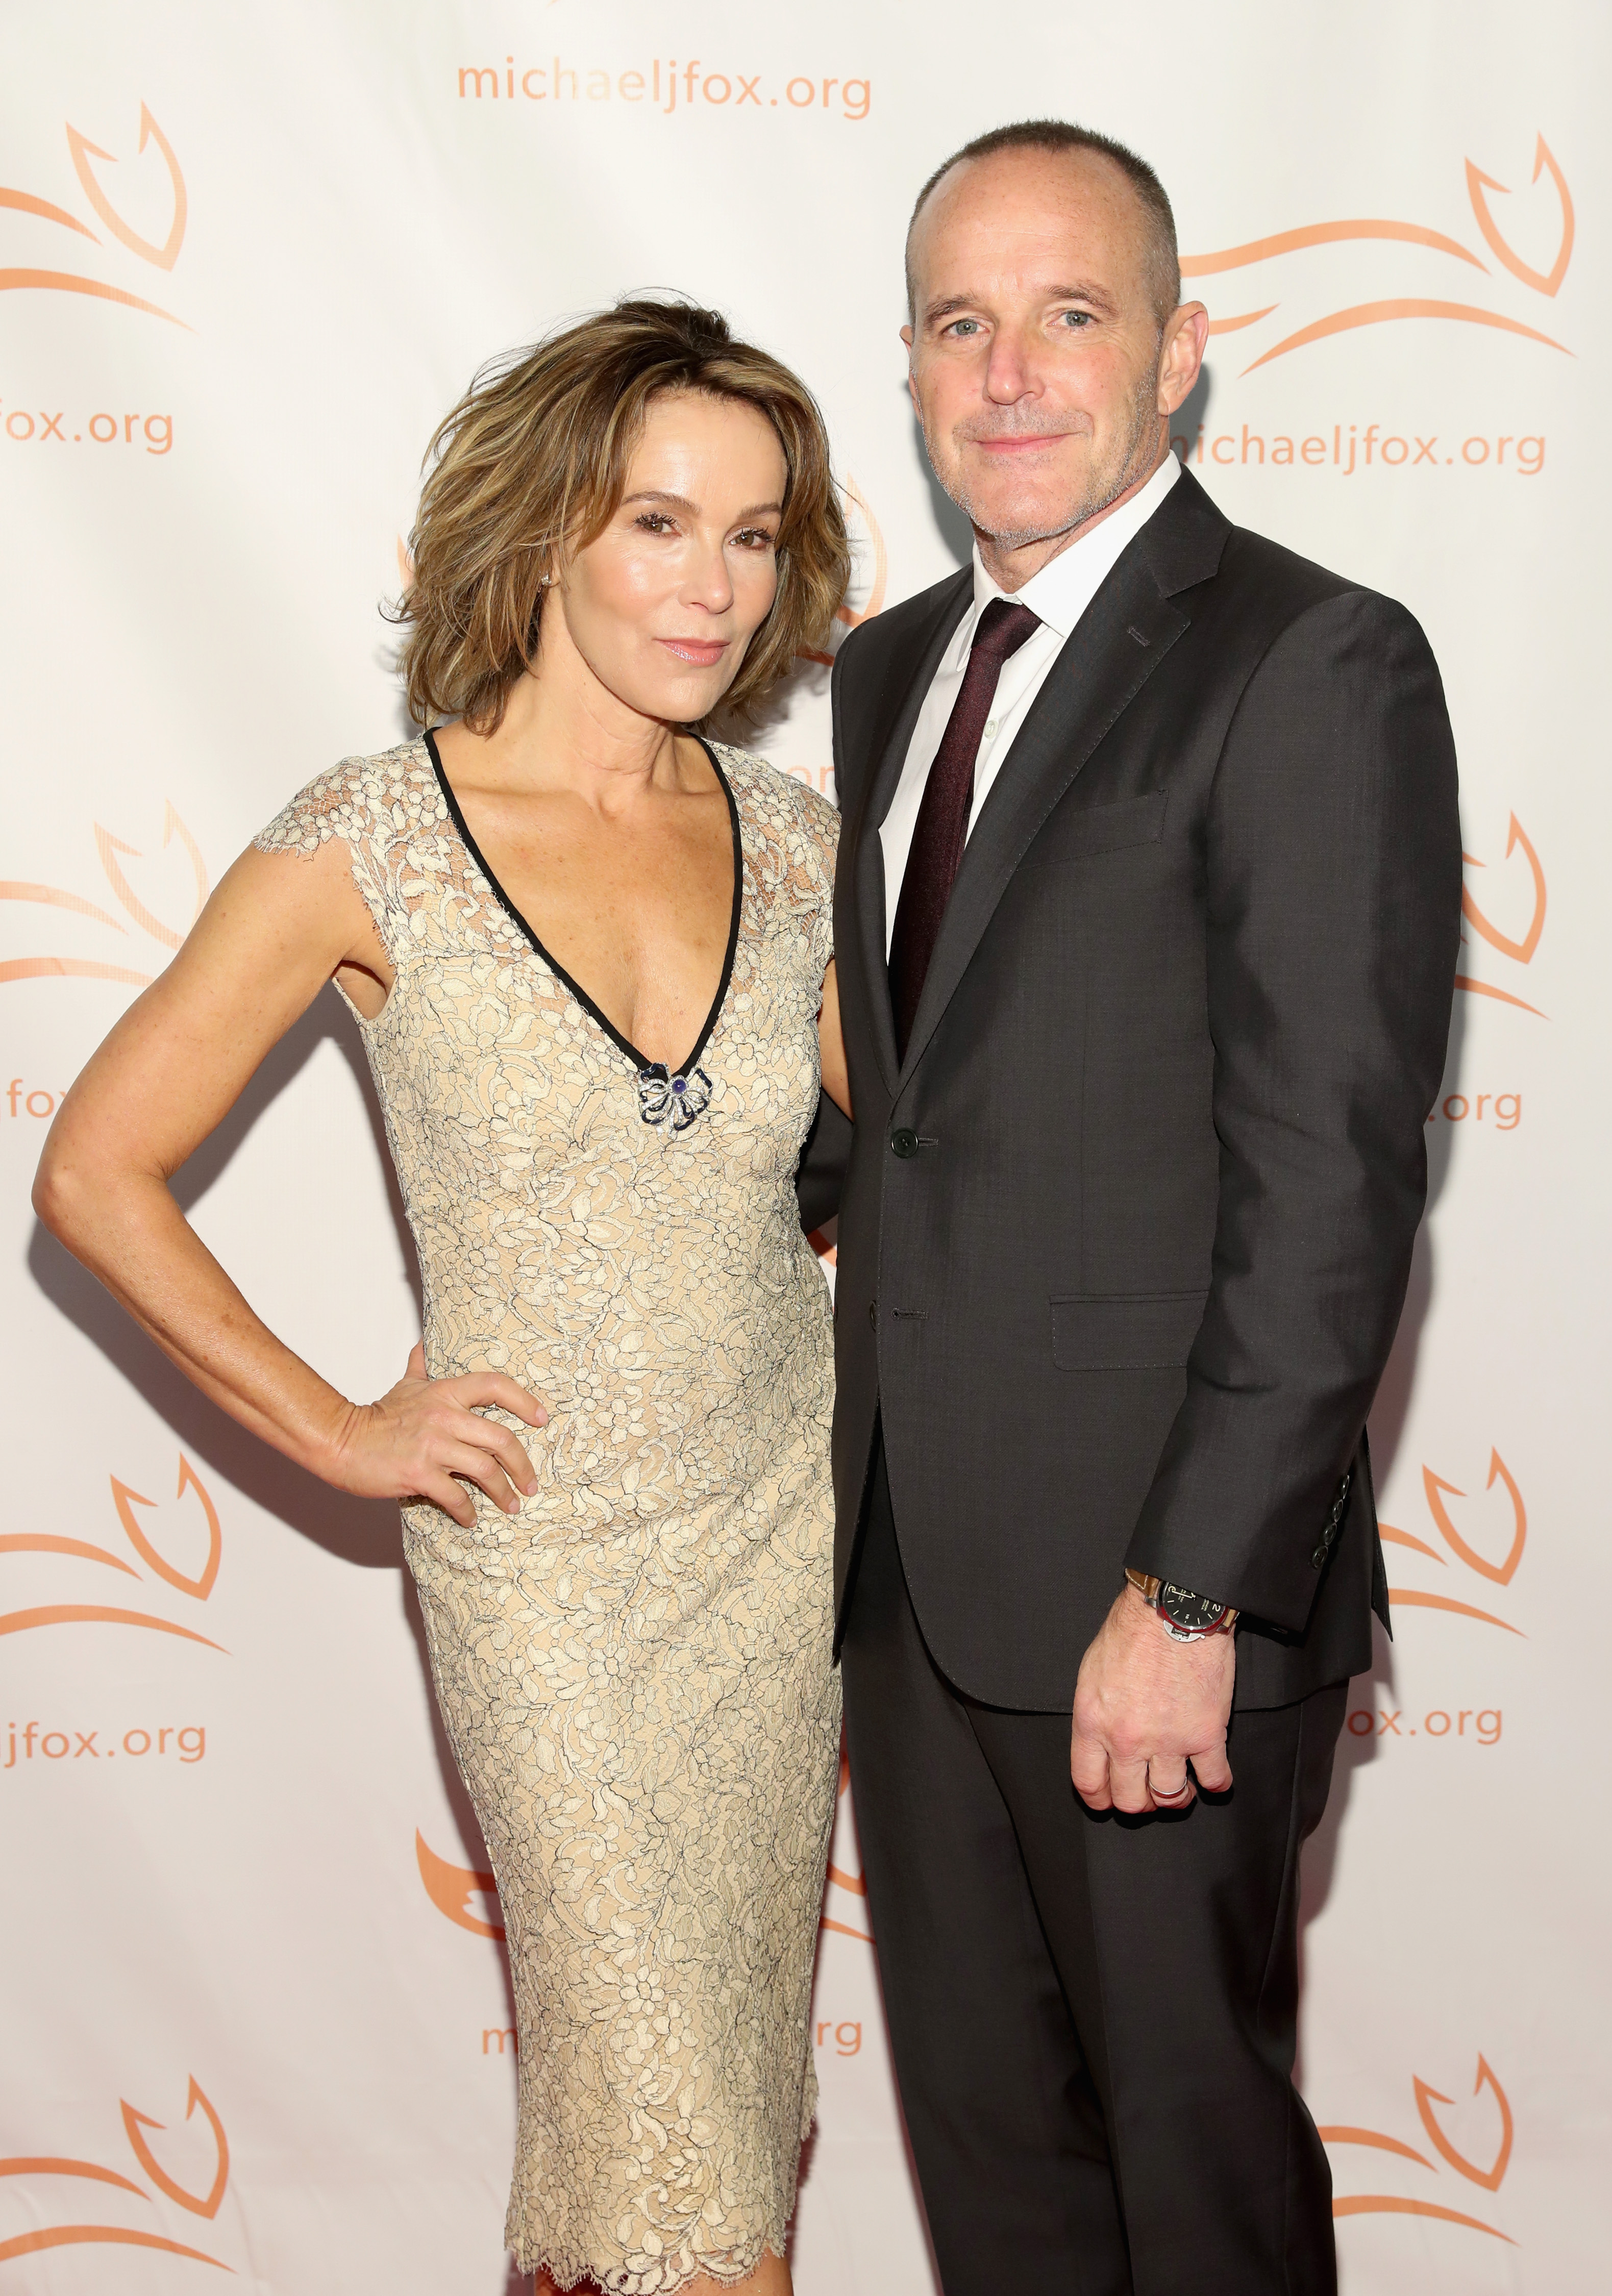 Jennifer Grey and Clark Gregg on the red carpet of "A Funny Thing Happened On The Way To Cure Parkinson's" benefitting The Michael J. Fox Foundation at the Hilton New York on November 10, 2018. | Source: Getty Images